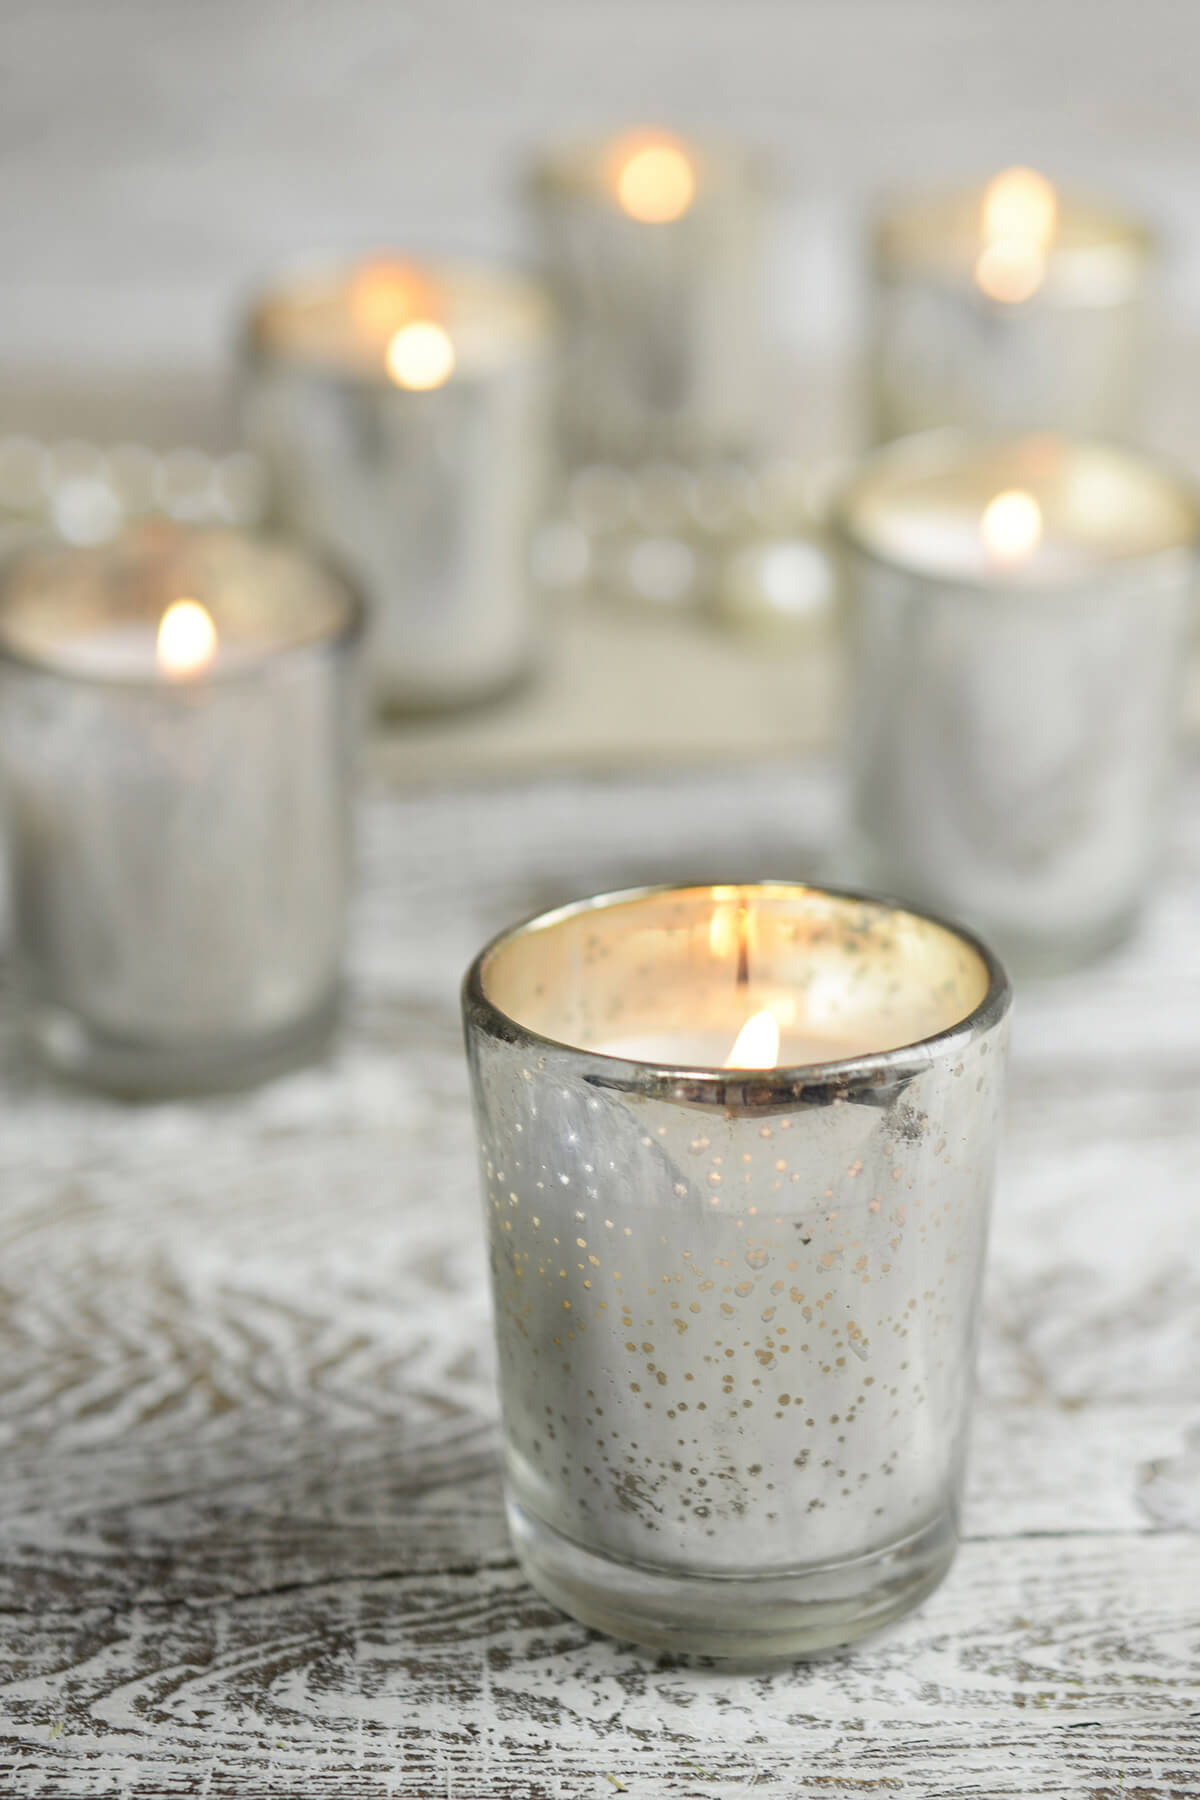 12 Candles and Silver Mercury Glass Votive Holders